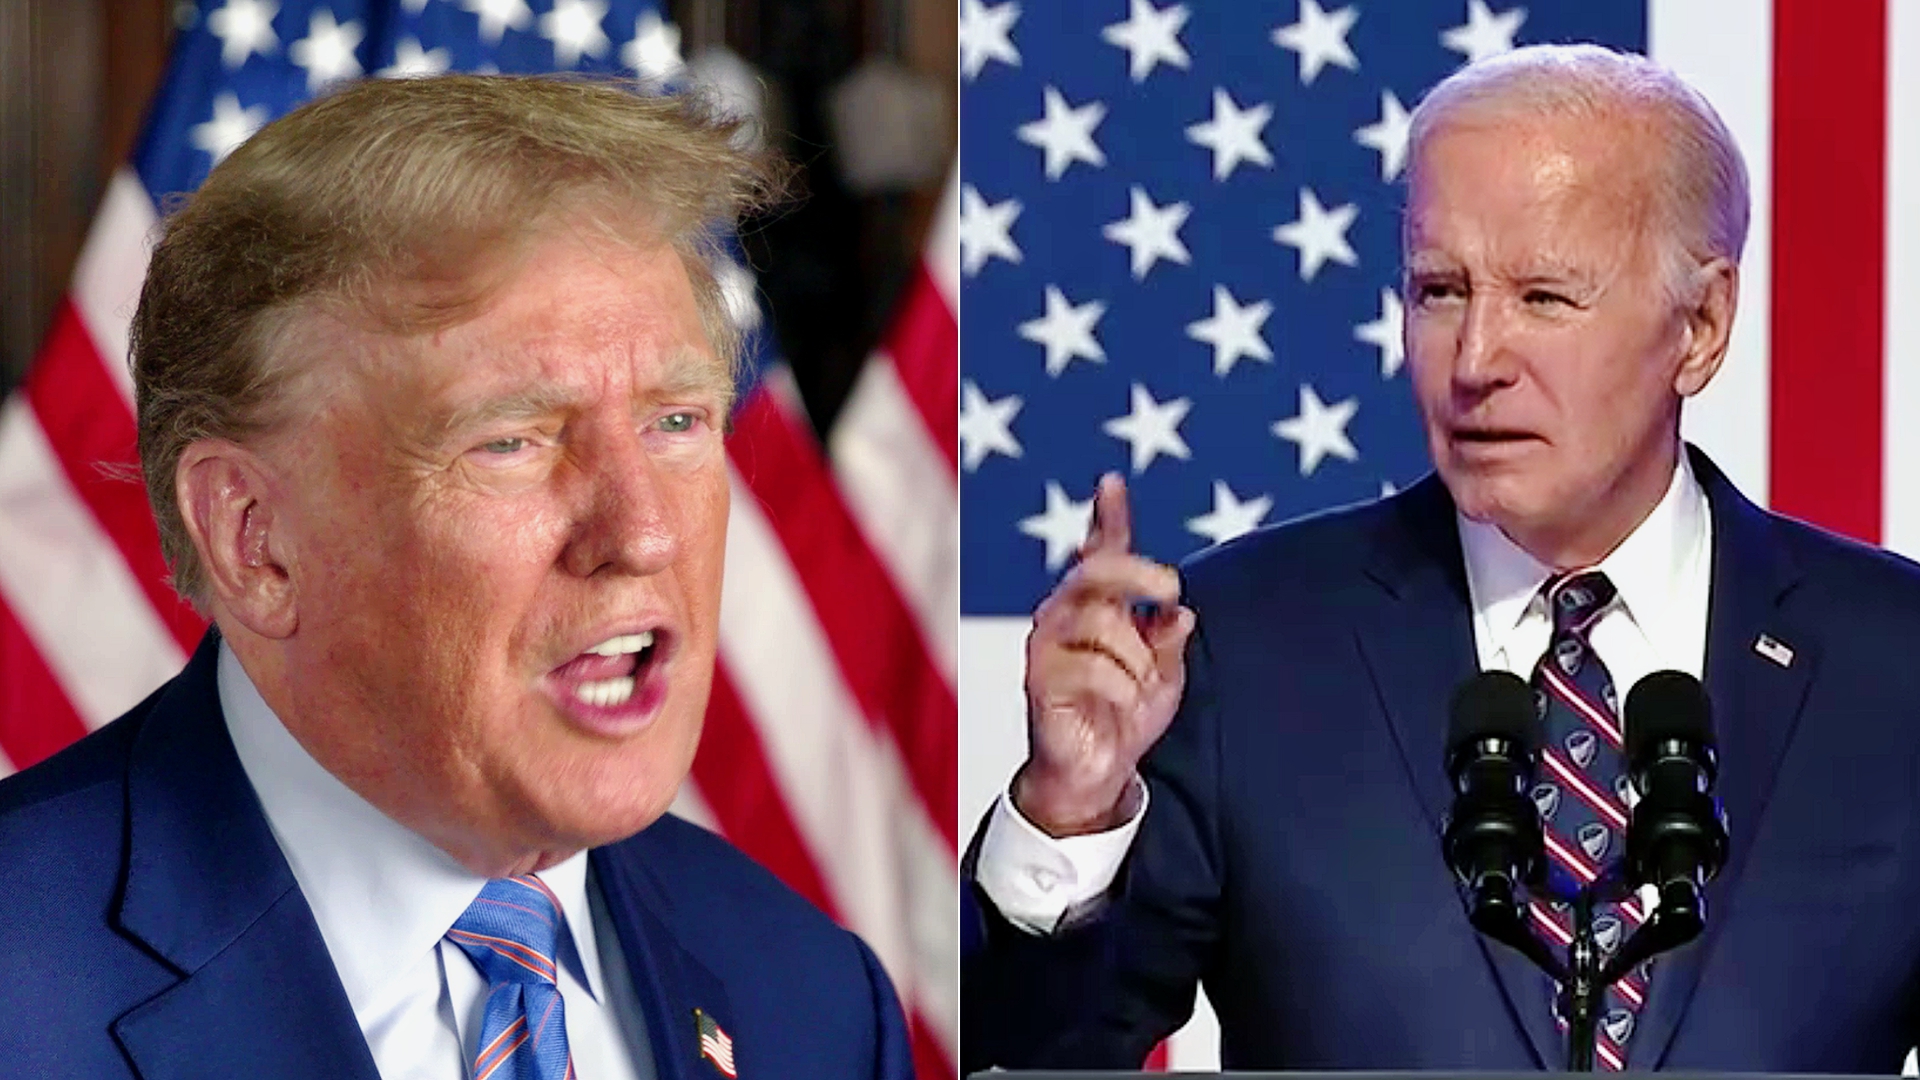 NEW POLL: Trump Once Again Tops Biden Outside the Margin of Error, On Heels of Blockbuster NY Times Poll